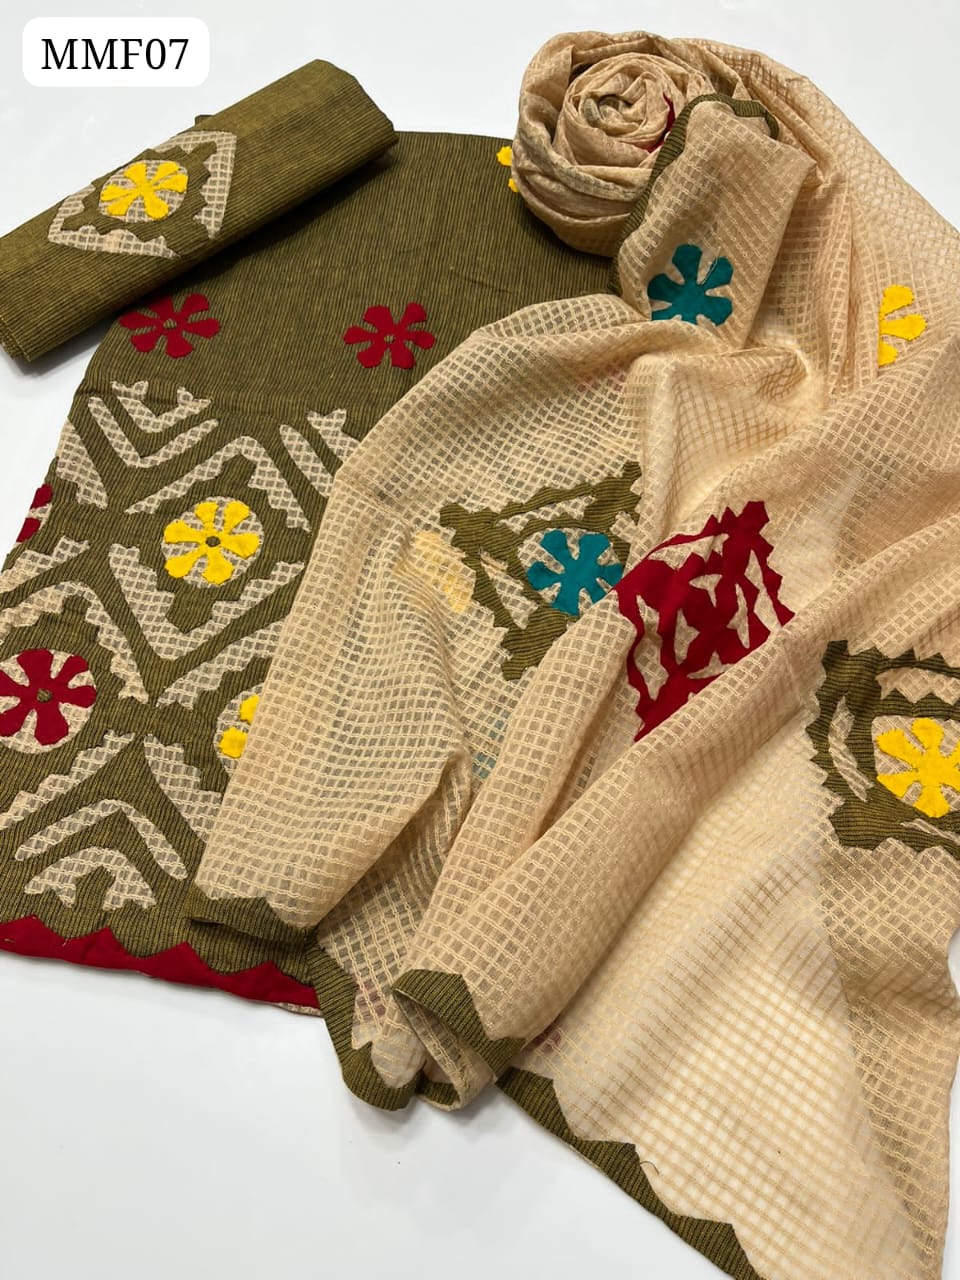 Khaadi Cotton Fabric Handmade Applique Work Shirt With Cotton Net Applique Work Embroidered Dupatta And Applique Embroidered Trouser 3Pc Dress